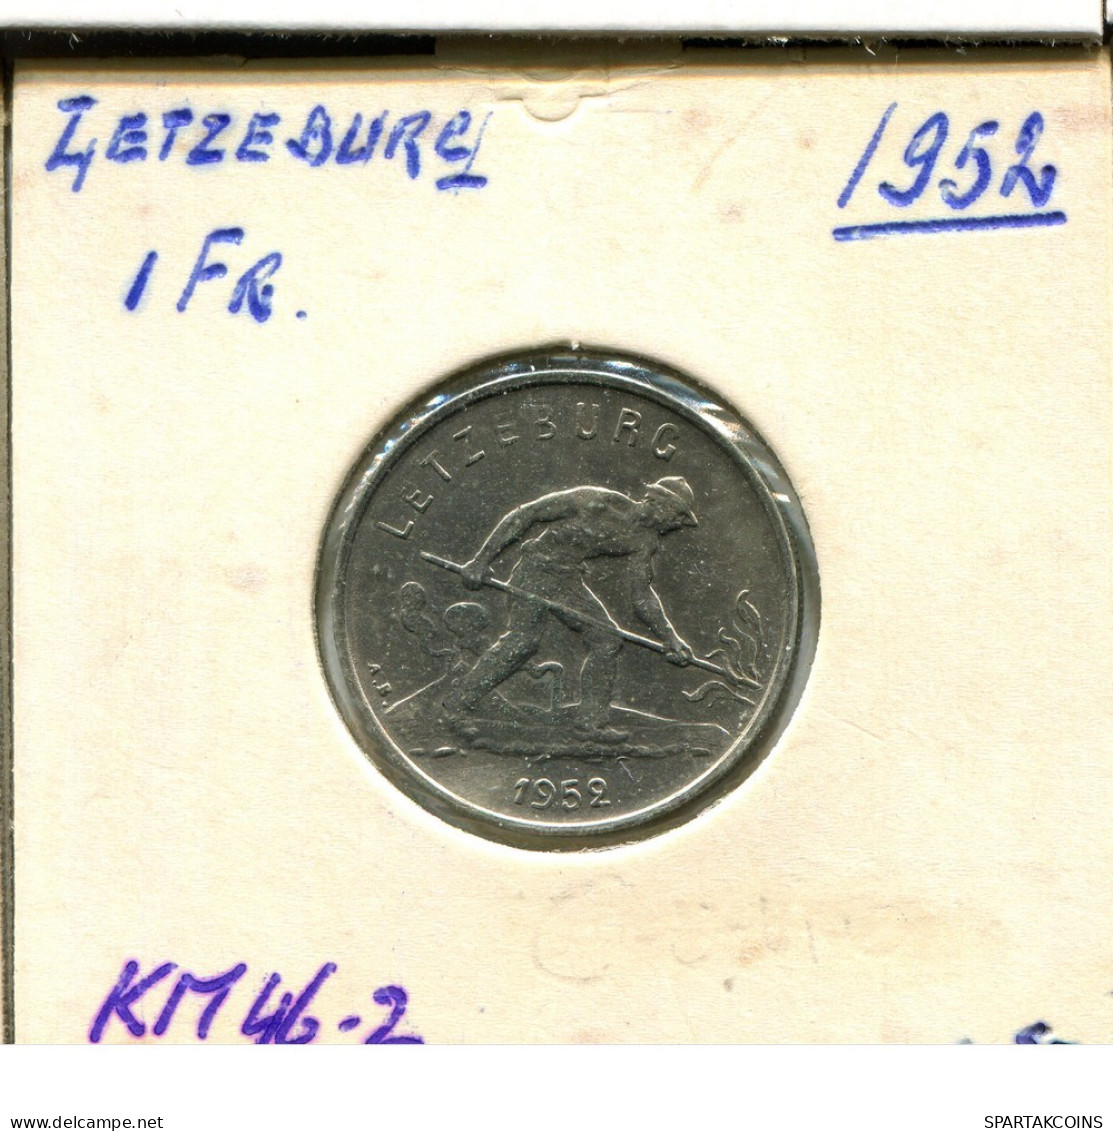 1 FRANC 1952 LUXEMBOURG Coin #AT202.U.A - Lussemburgo